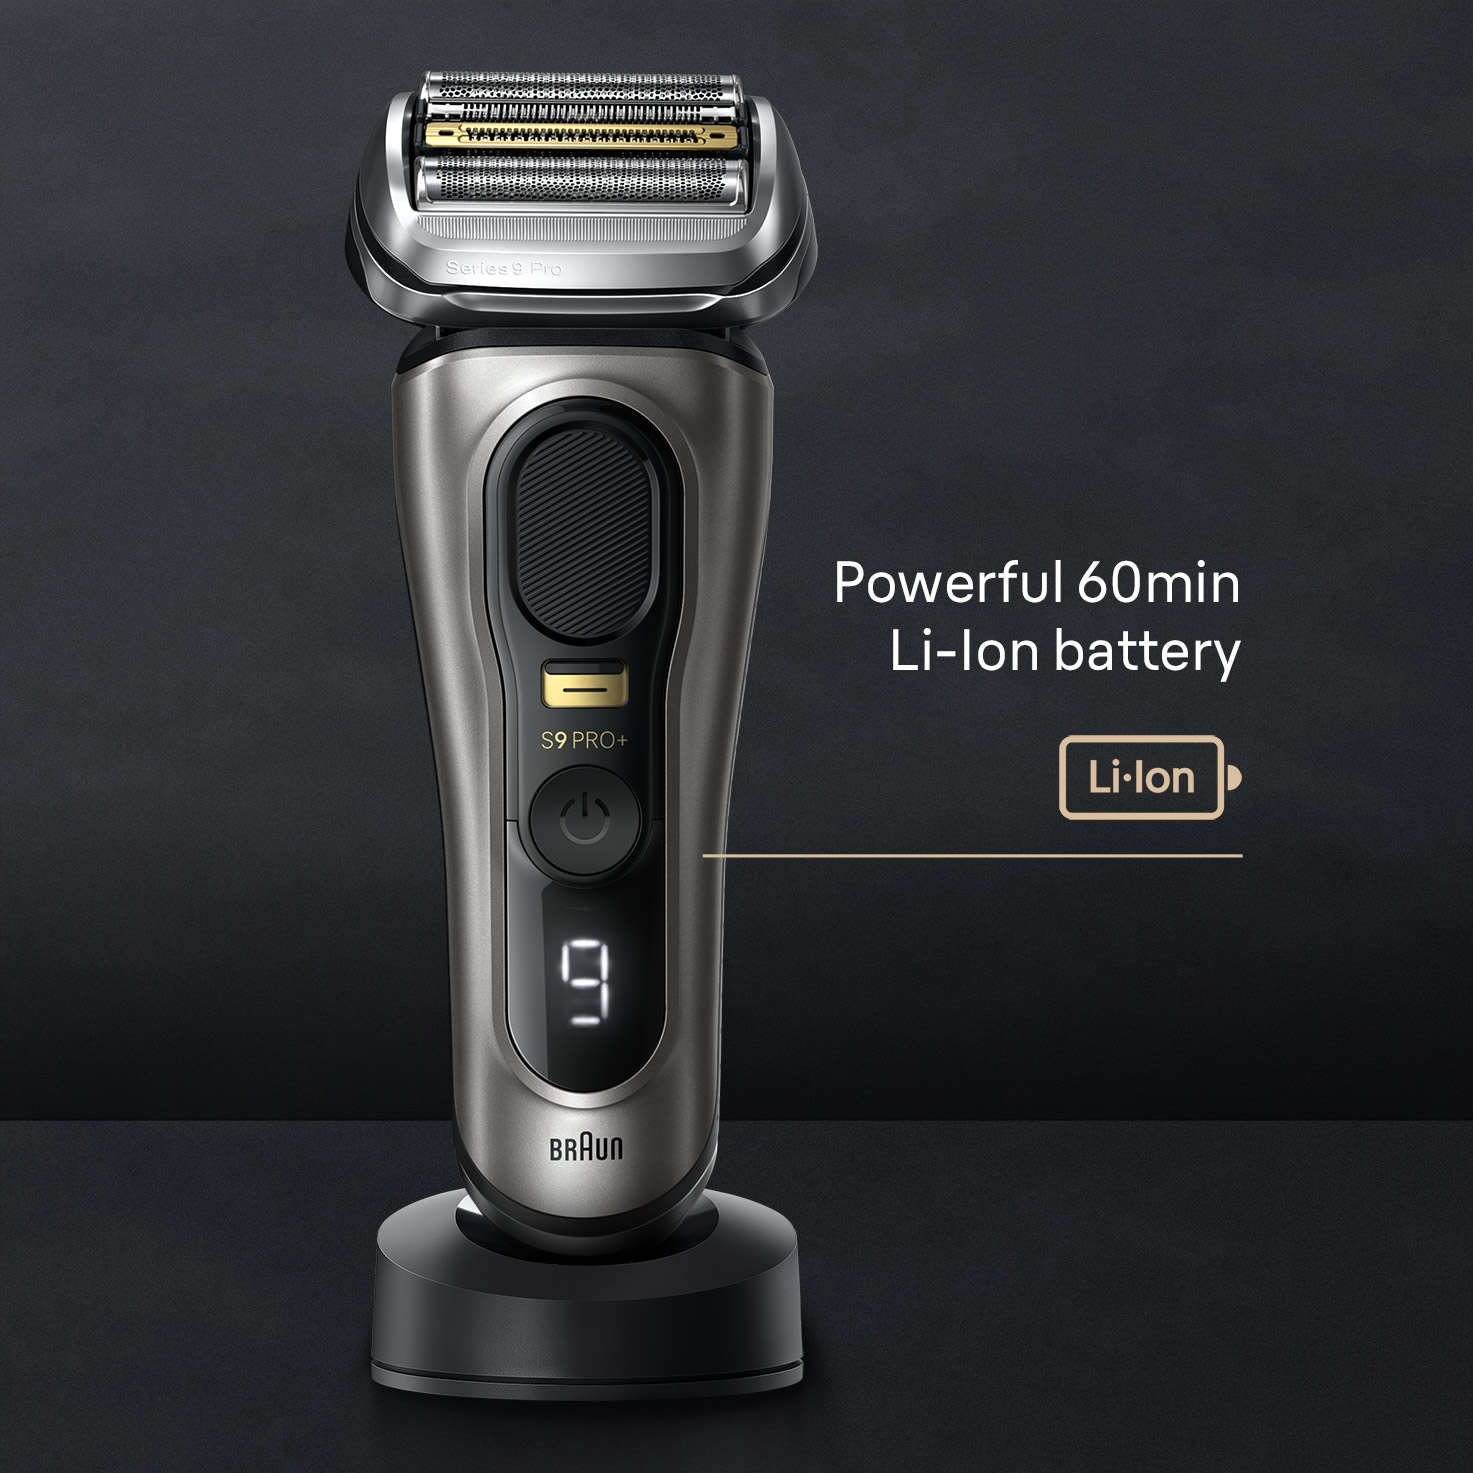 Braun Series 9 Electric Shavers for sale in Munich, Germany